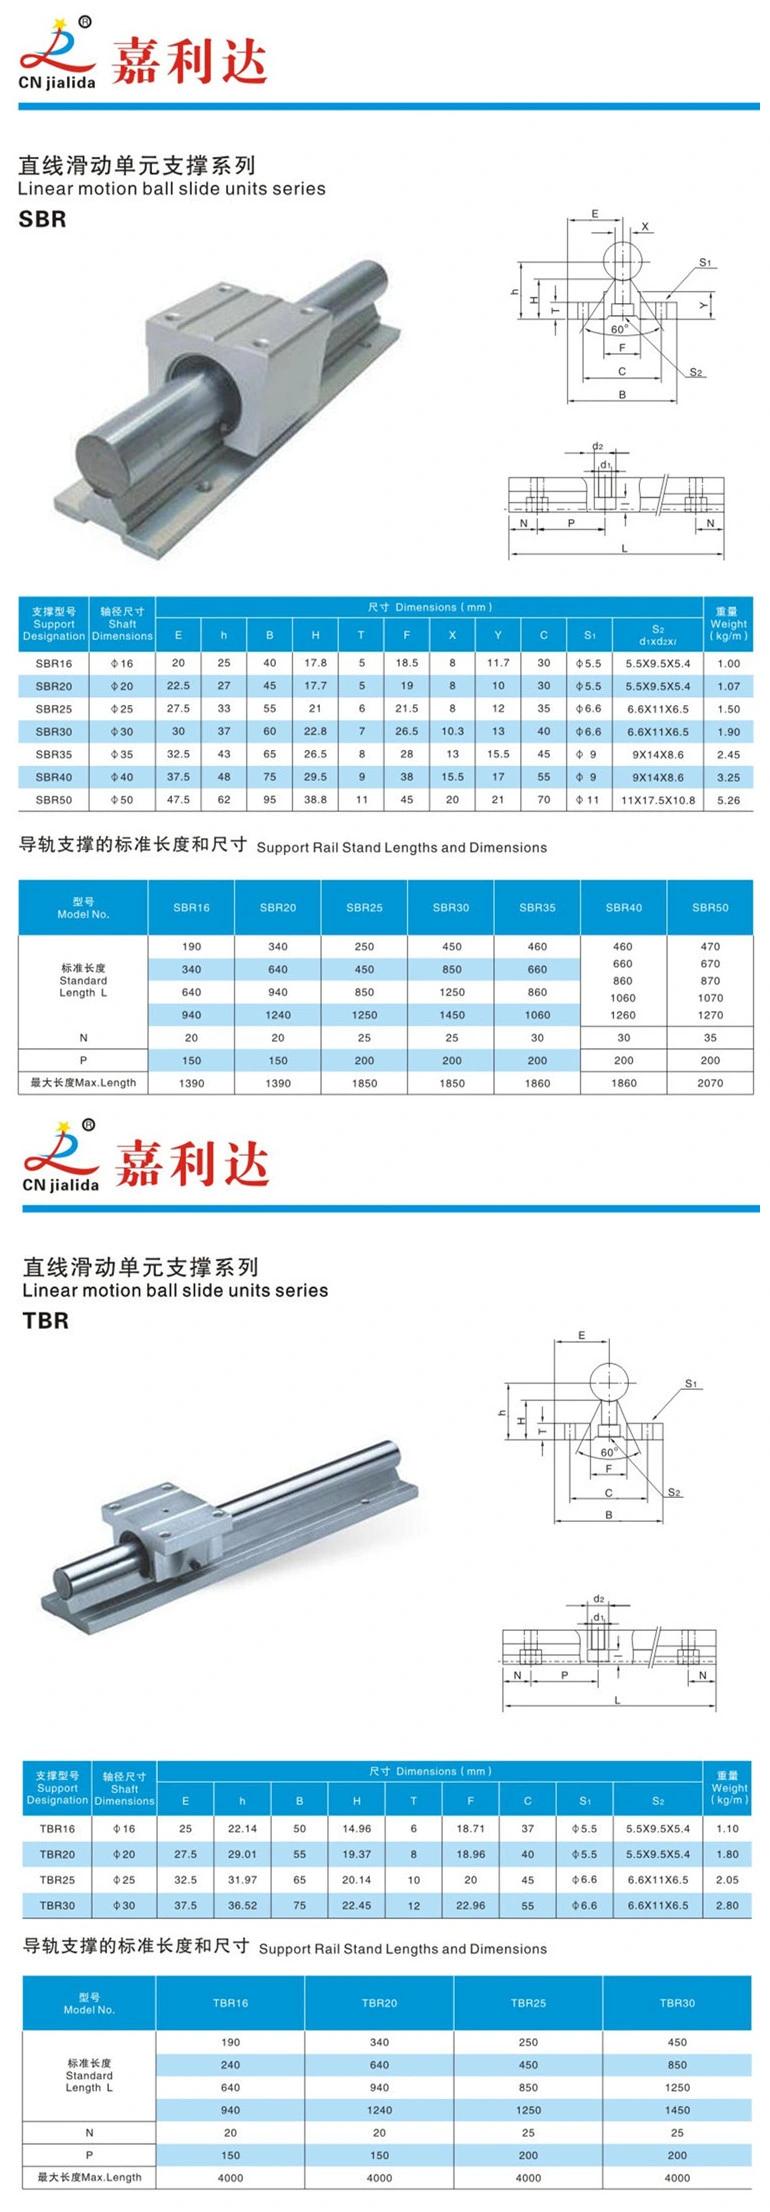 China Lishui Bearing Precision 20mm Linear Guide for CNC Wooden Router (SBR20)